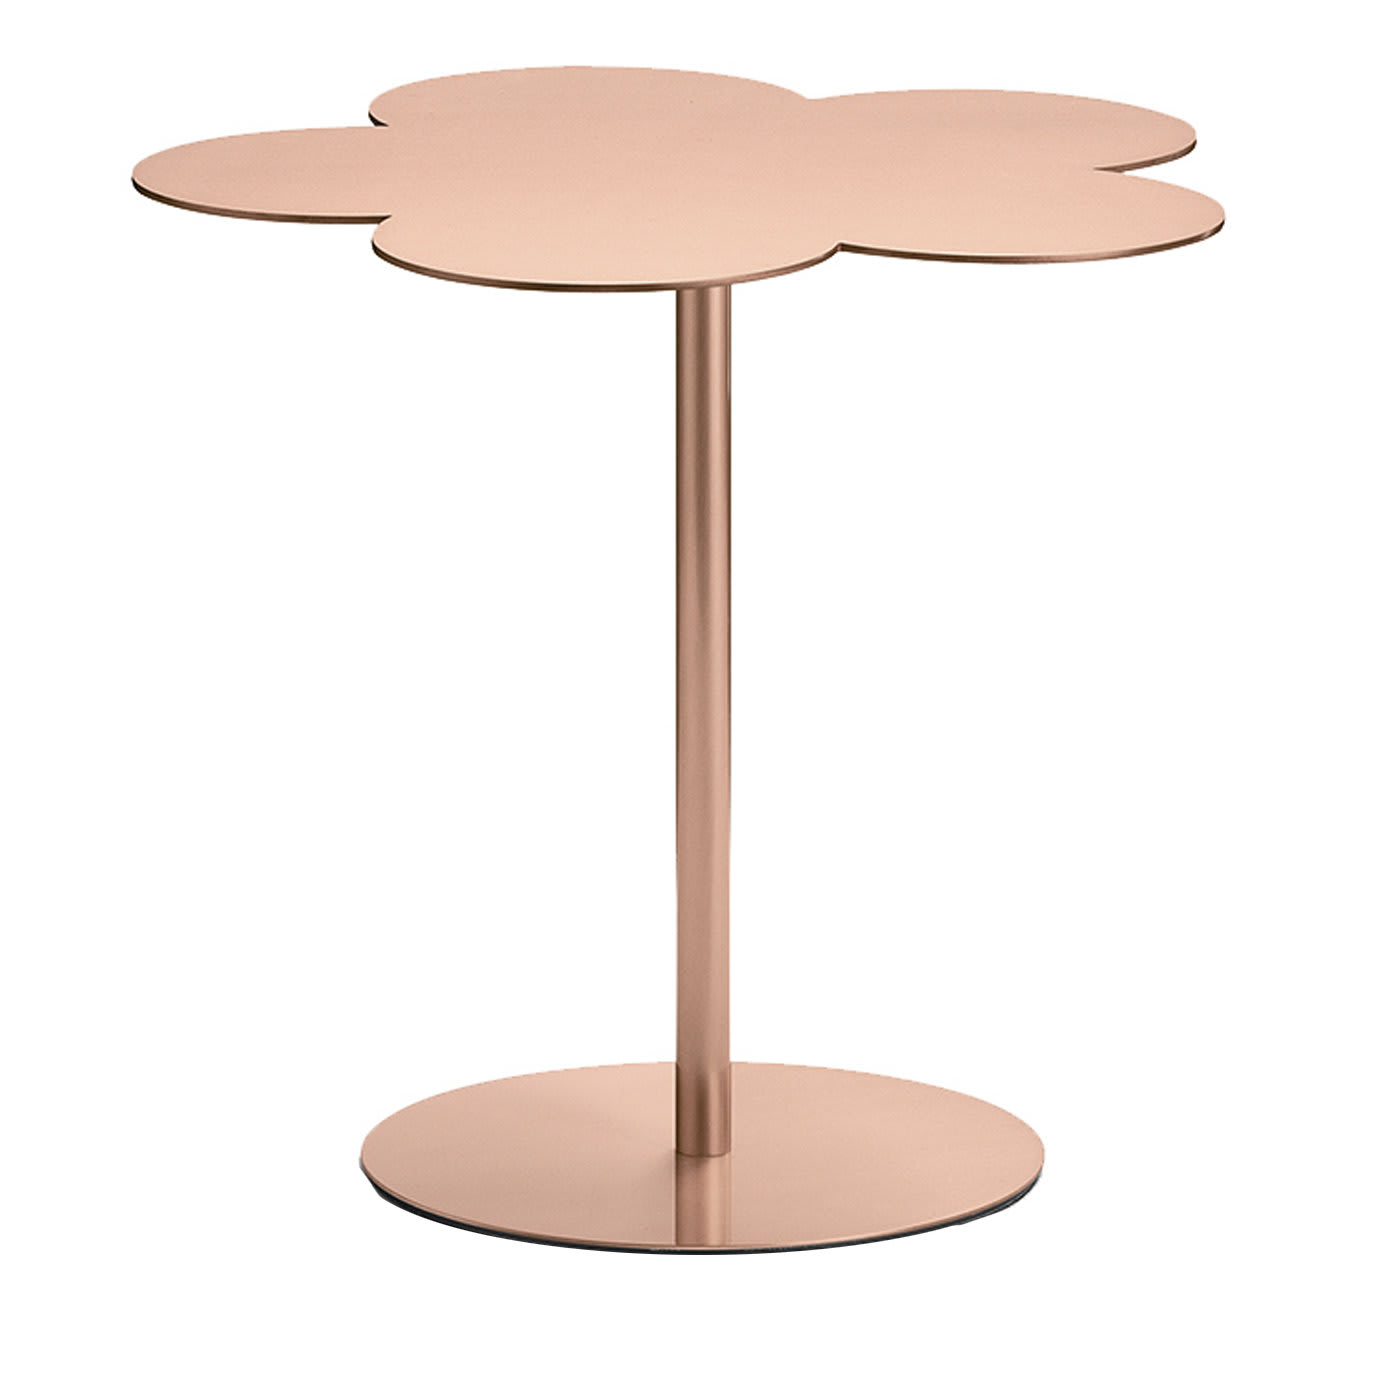 Flowers Copper Large Side Table By Stefano Giovannoni - Ghidini 1961